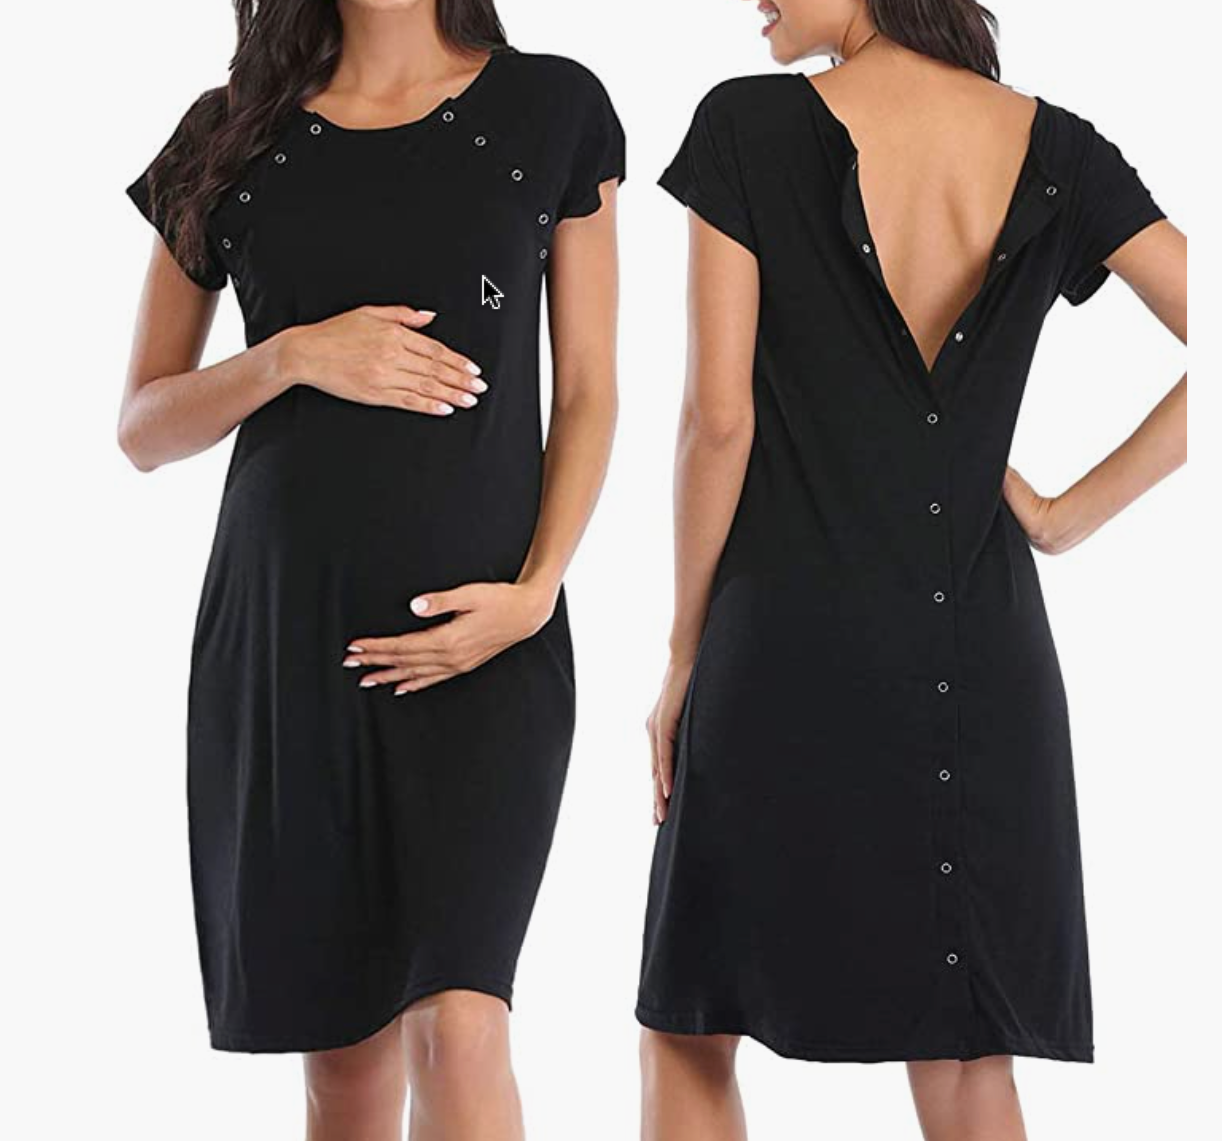 The 8 Best Gowns for Labor and Delivery of 2023